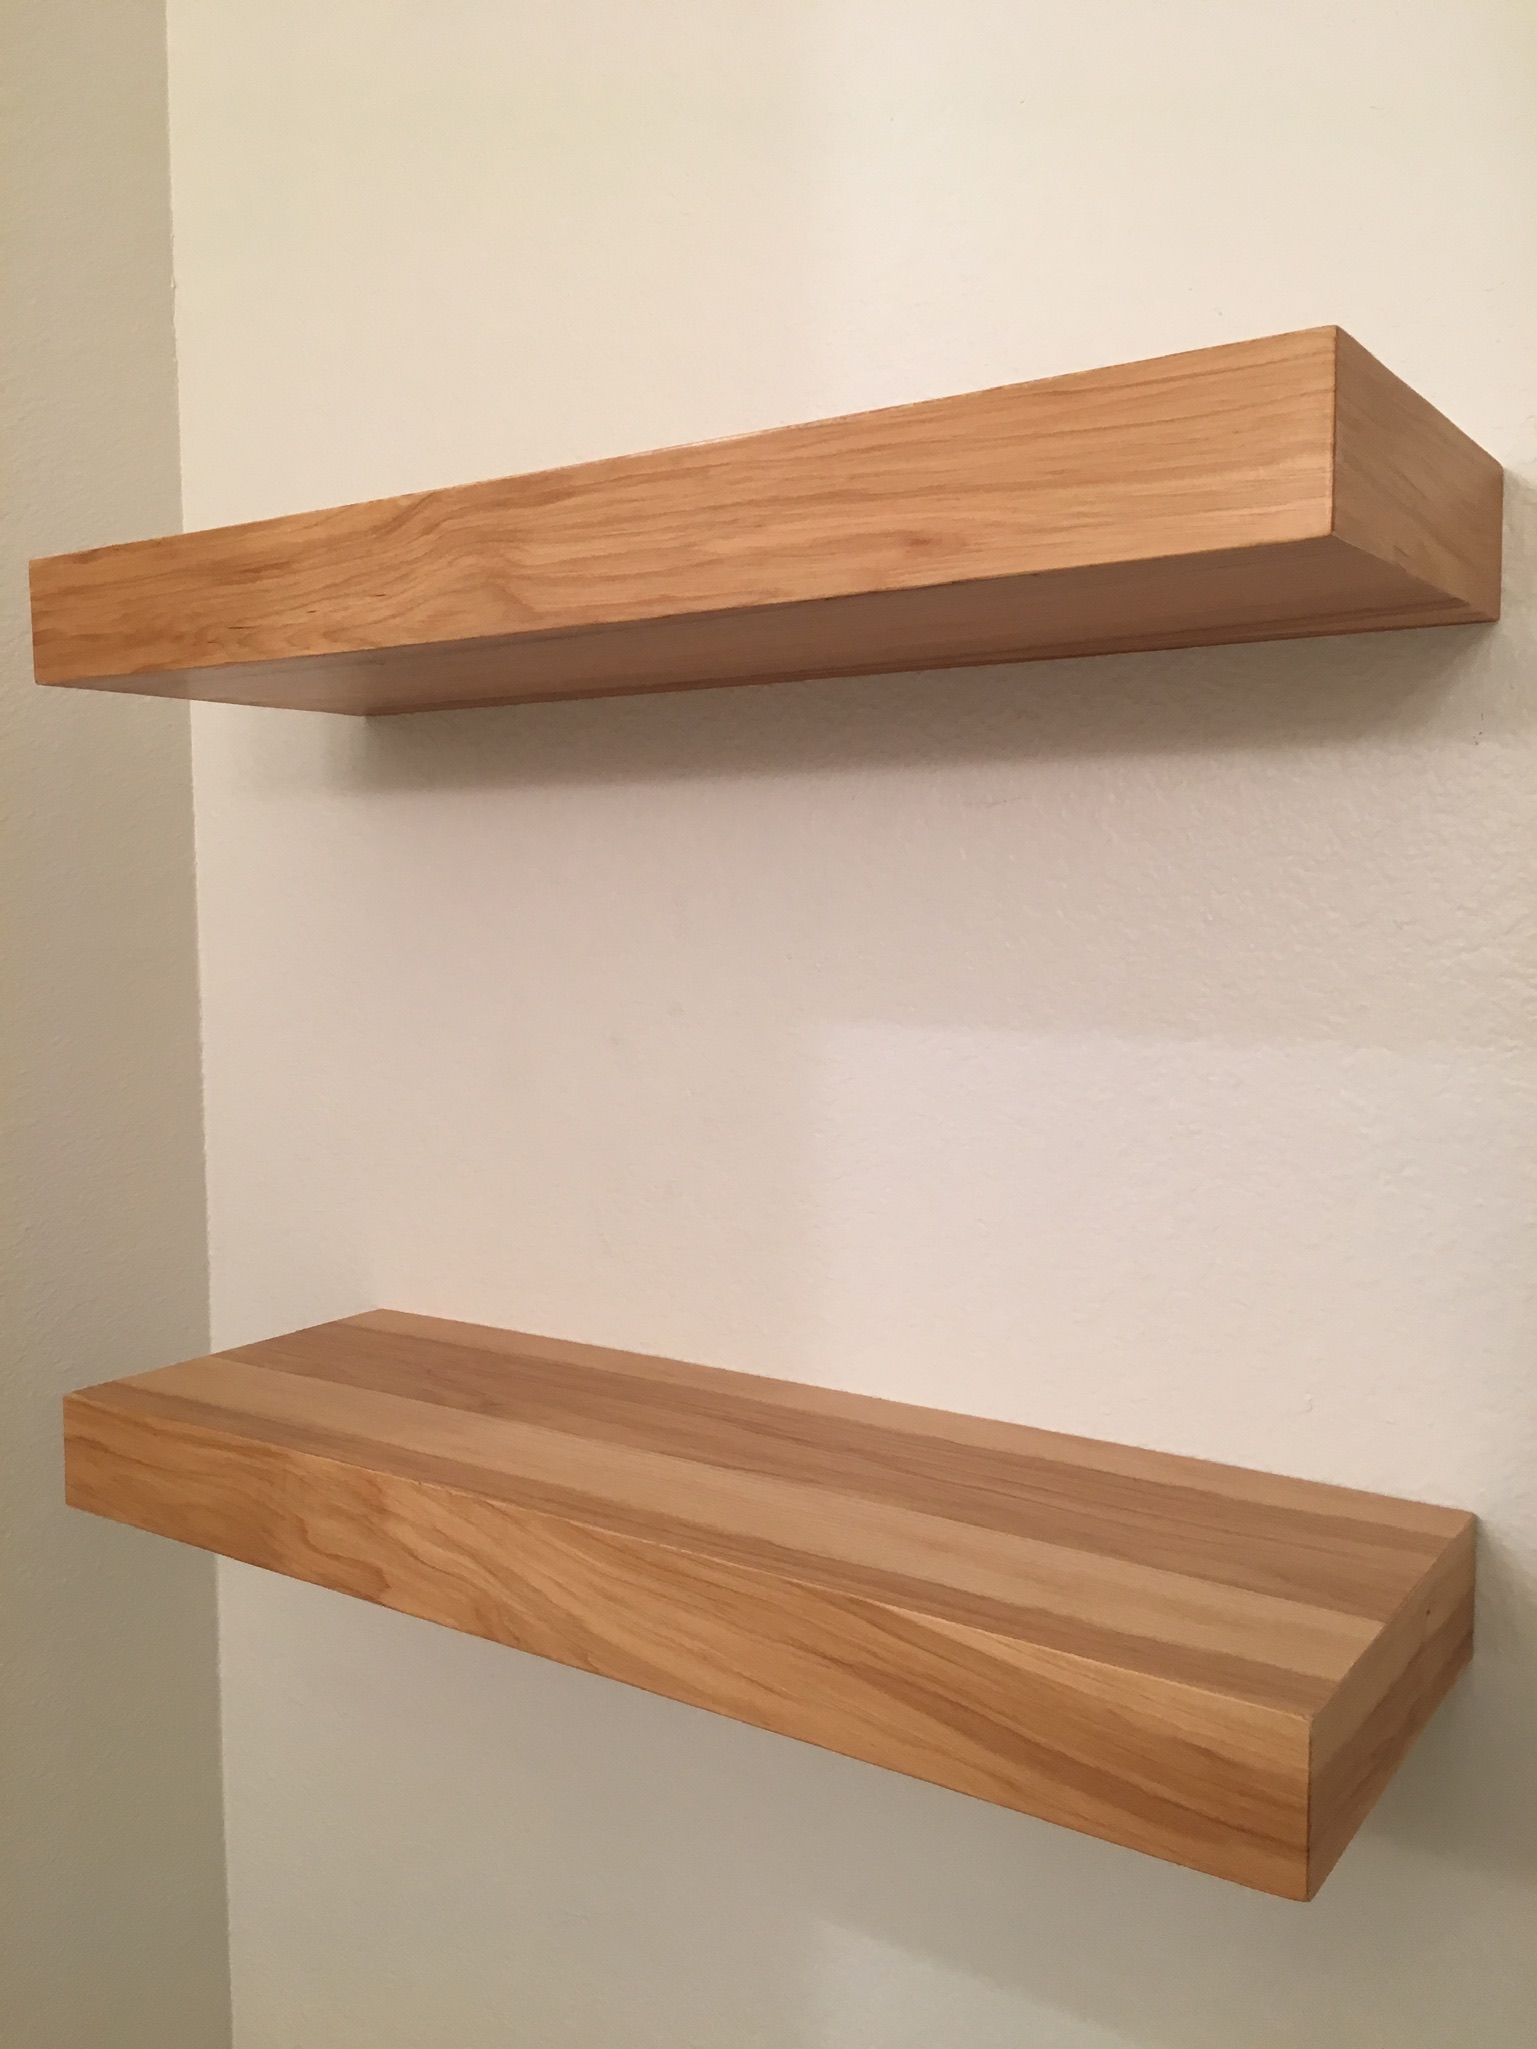 Over commode shelving